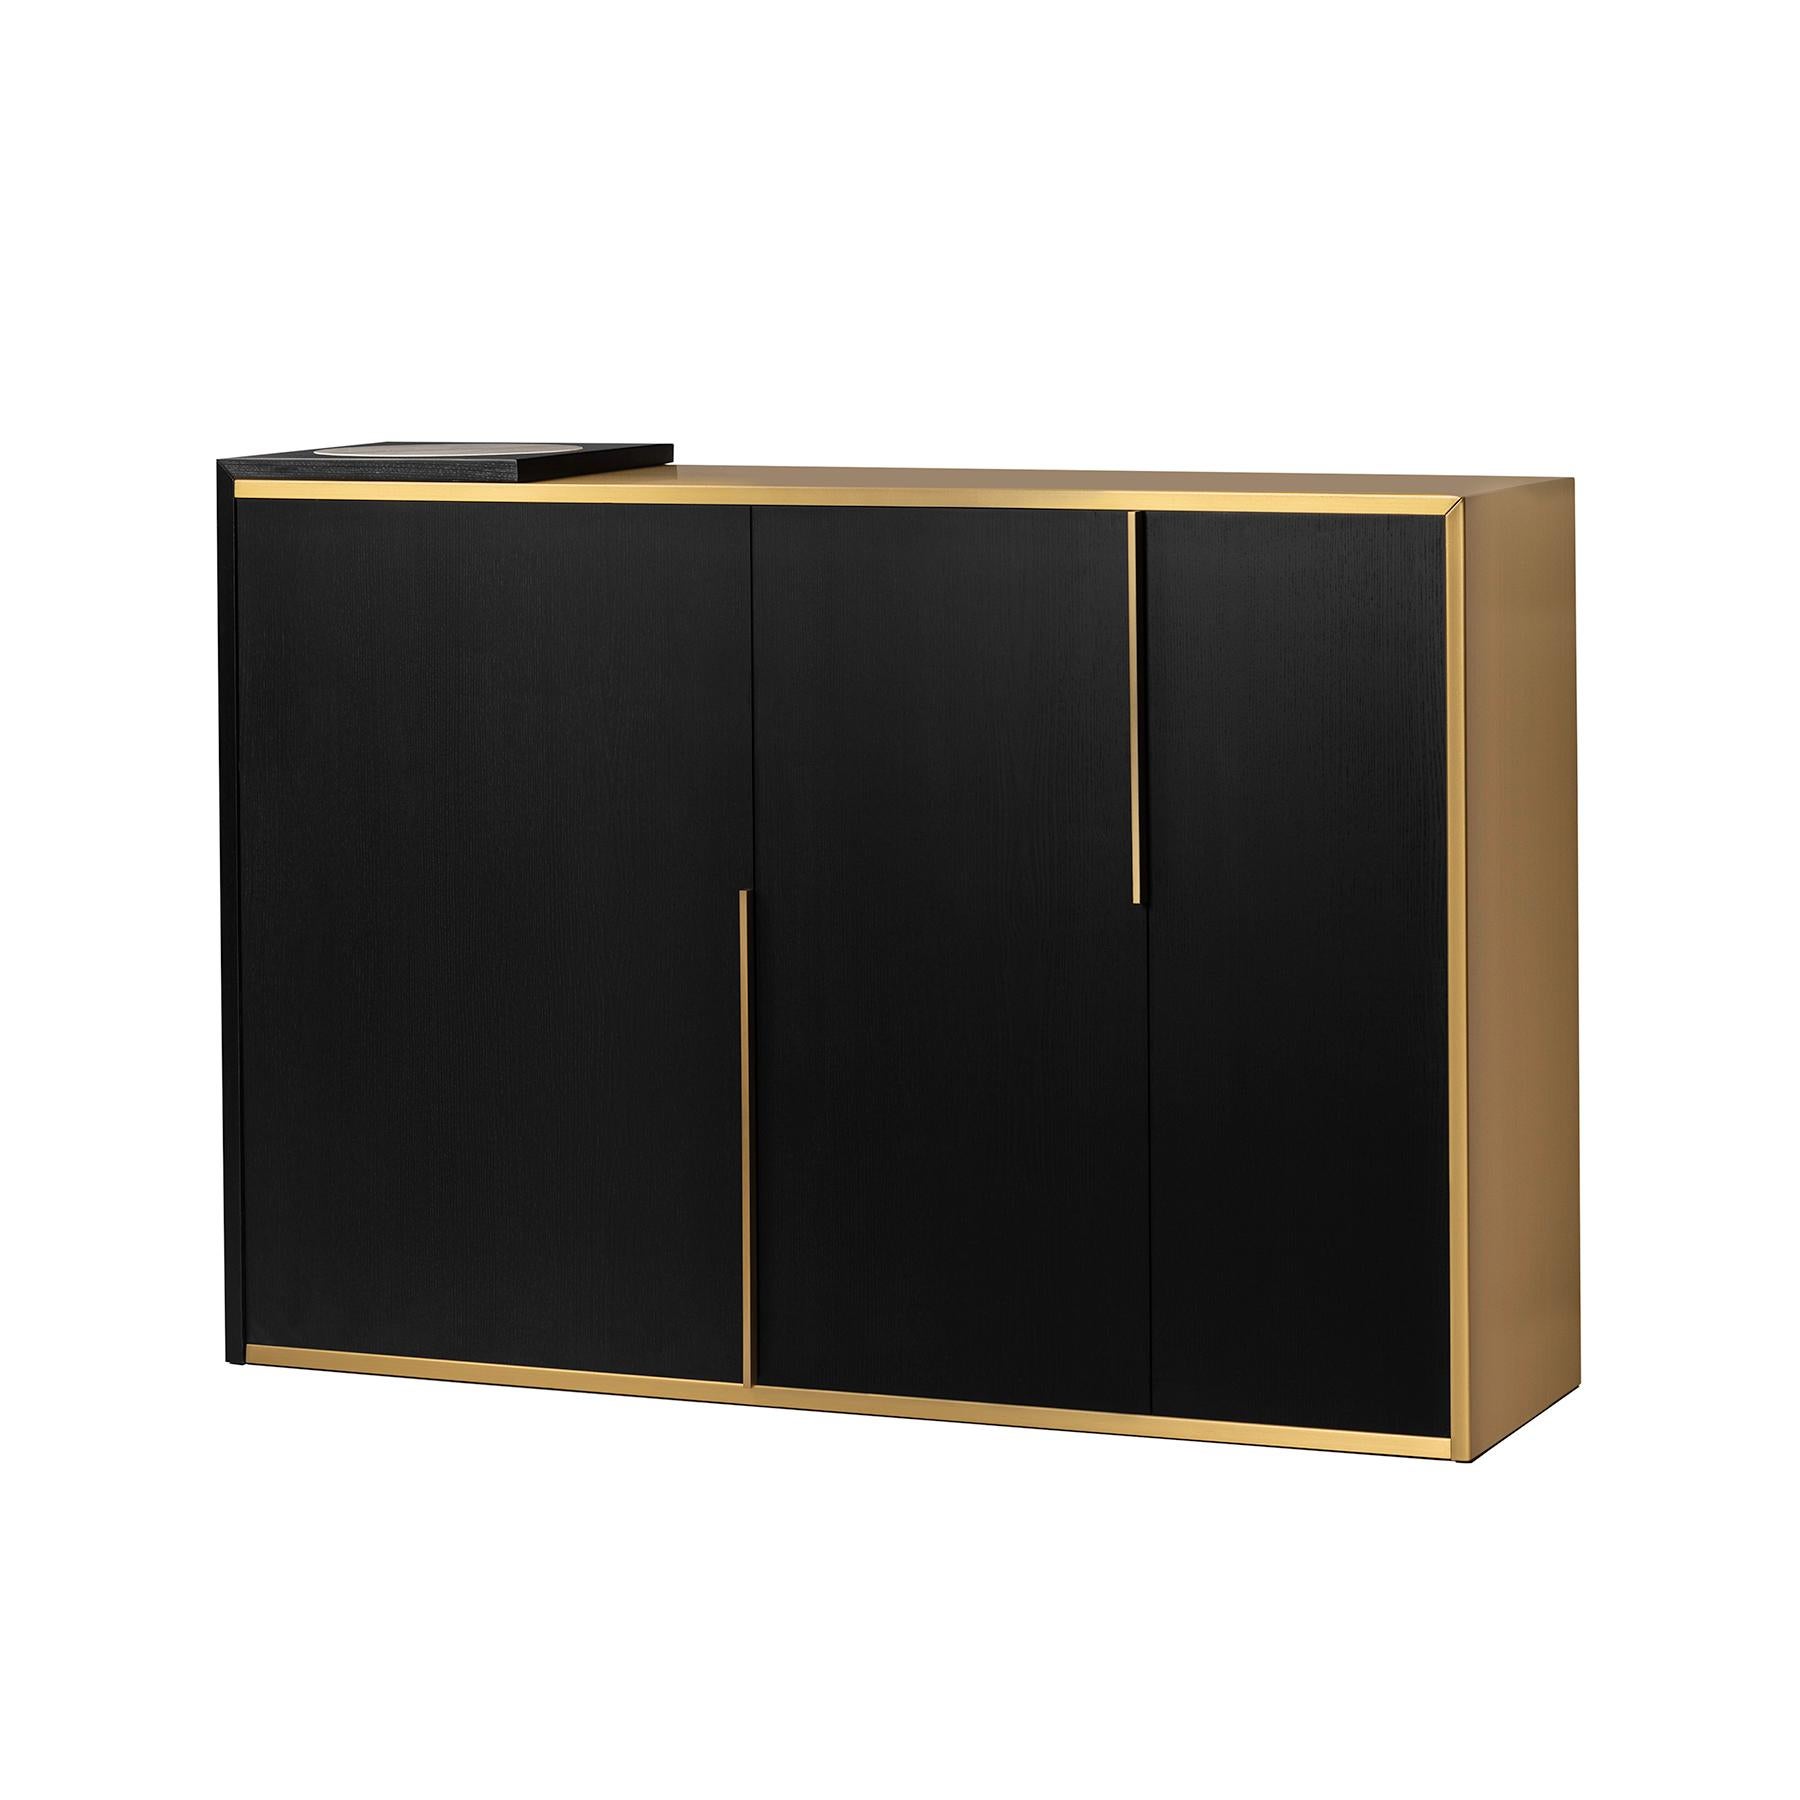 Proportion and compositional elegance for a timeless piece of furniture.
Satin-finish brass embraces the deep black of the ash wood like a line of light, while a disc of Calacatta marble shines ethereally on the top.
Each element is in harmonious